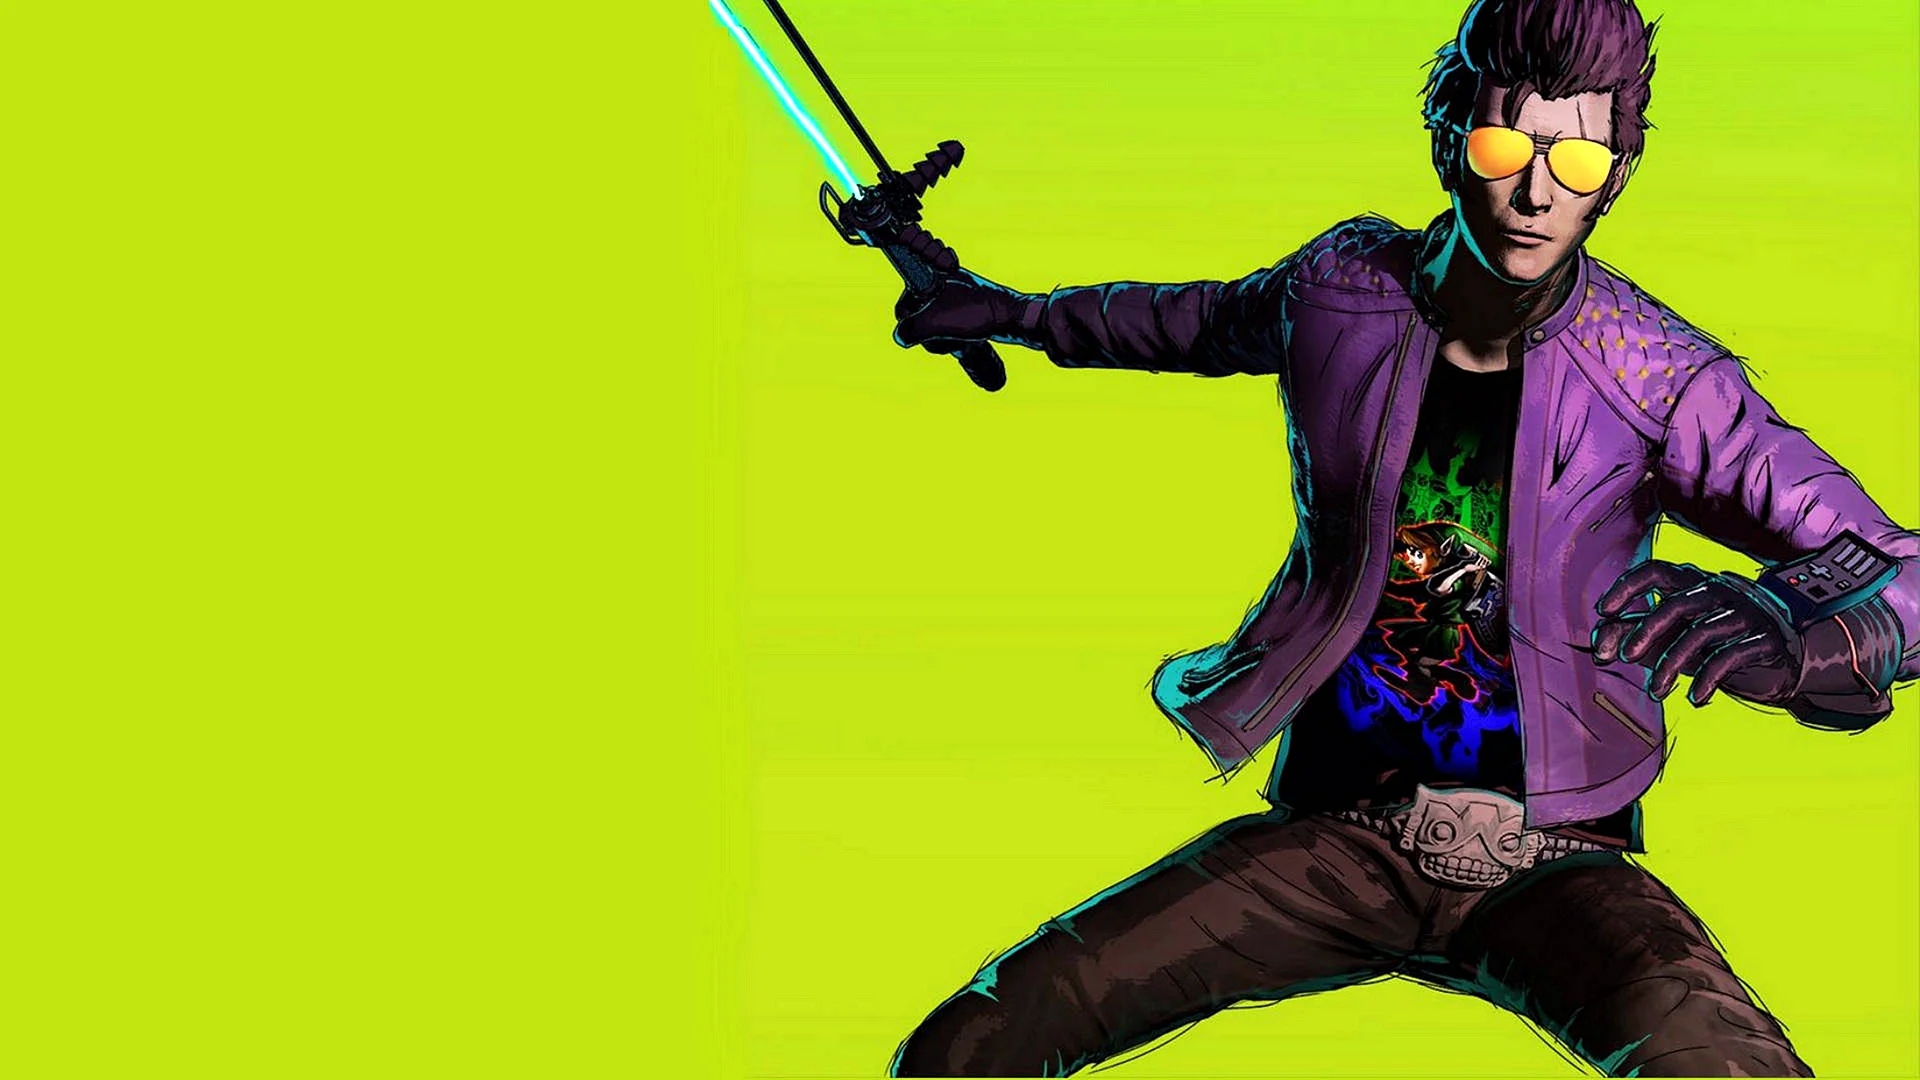 Travis Touchdown No More Heroes Poster Wallpaper